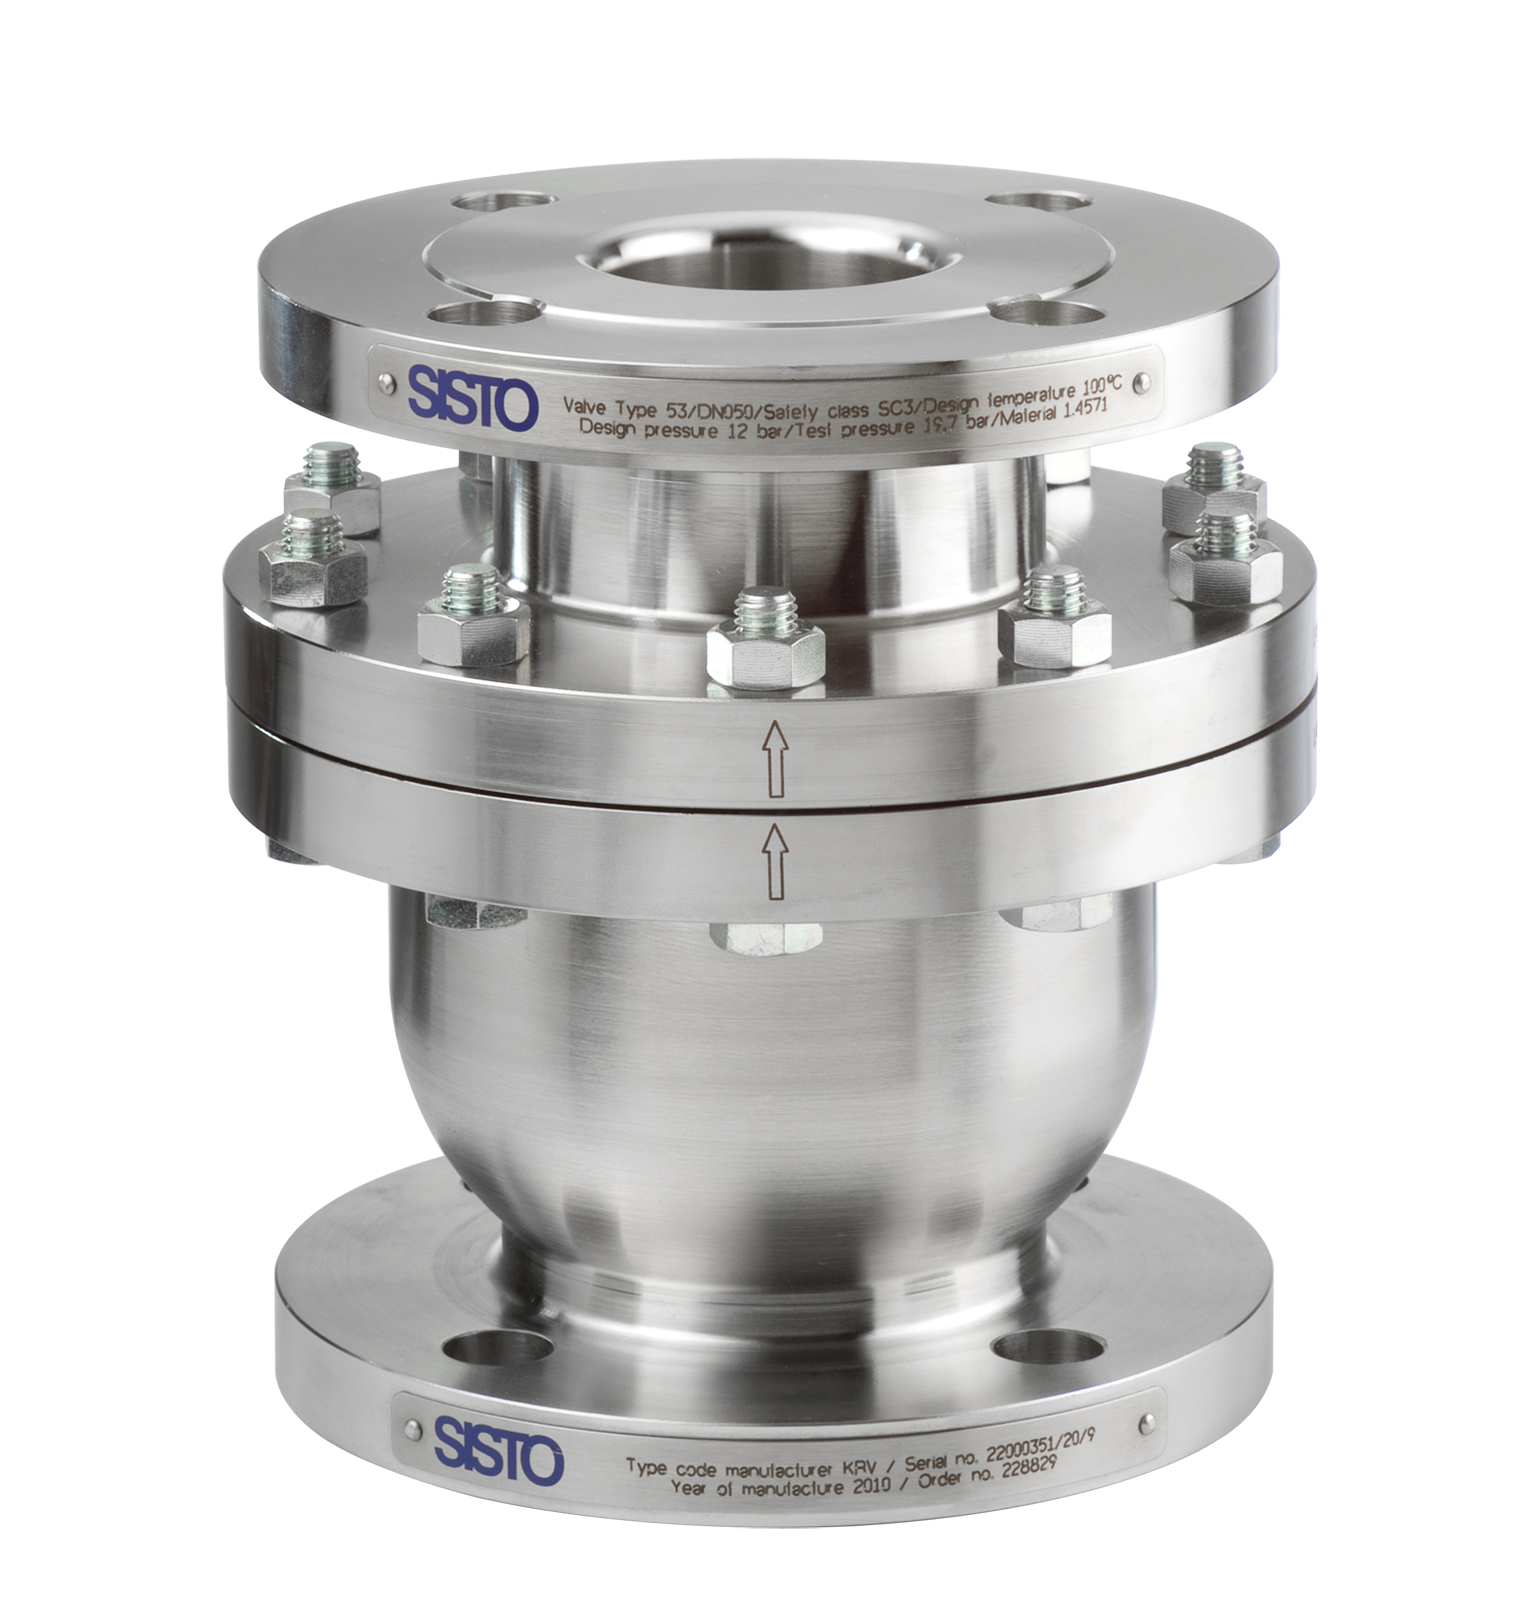 Fluid-controlled SISTO-KRVNA valves vent additional safety systems in nuclear power stations.